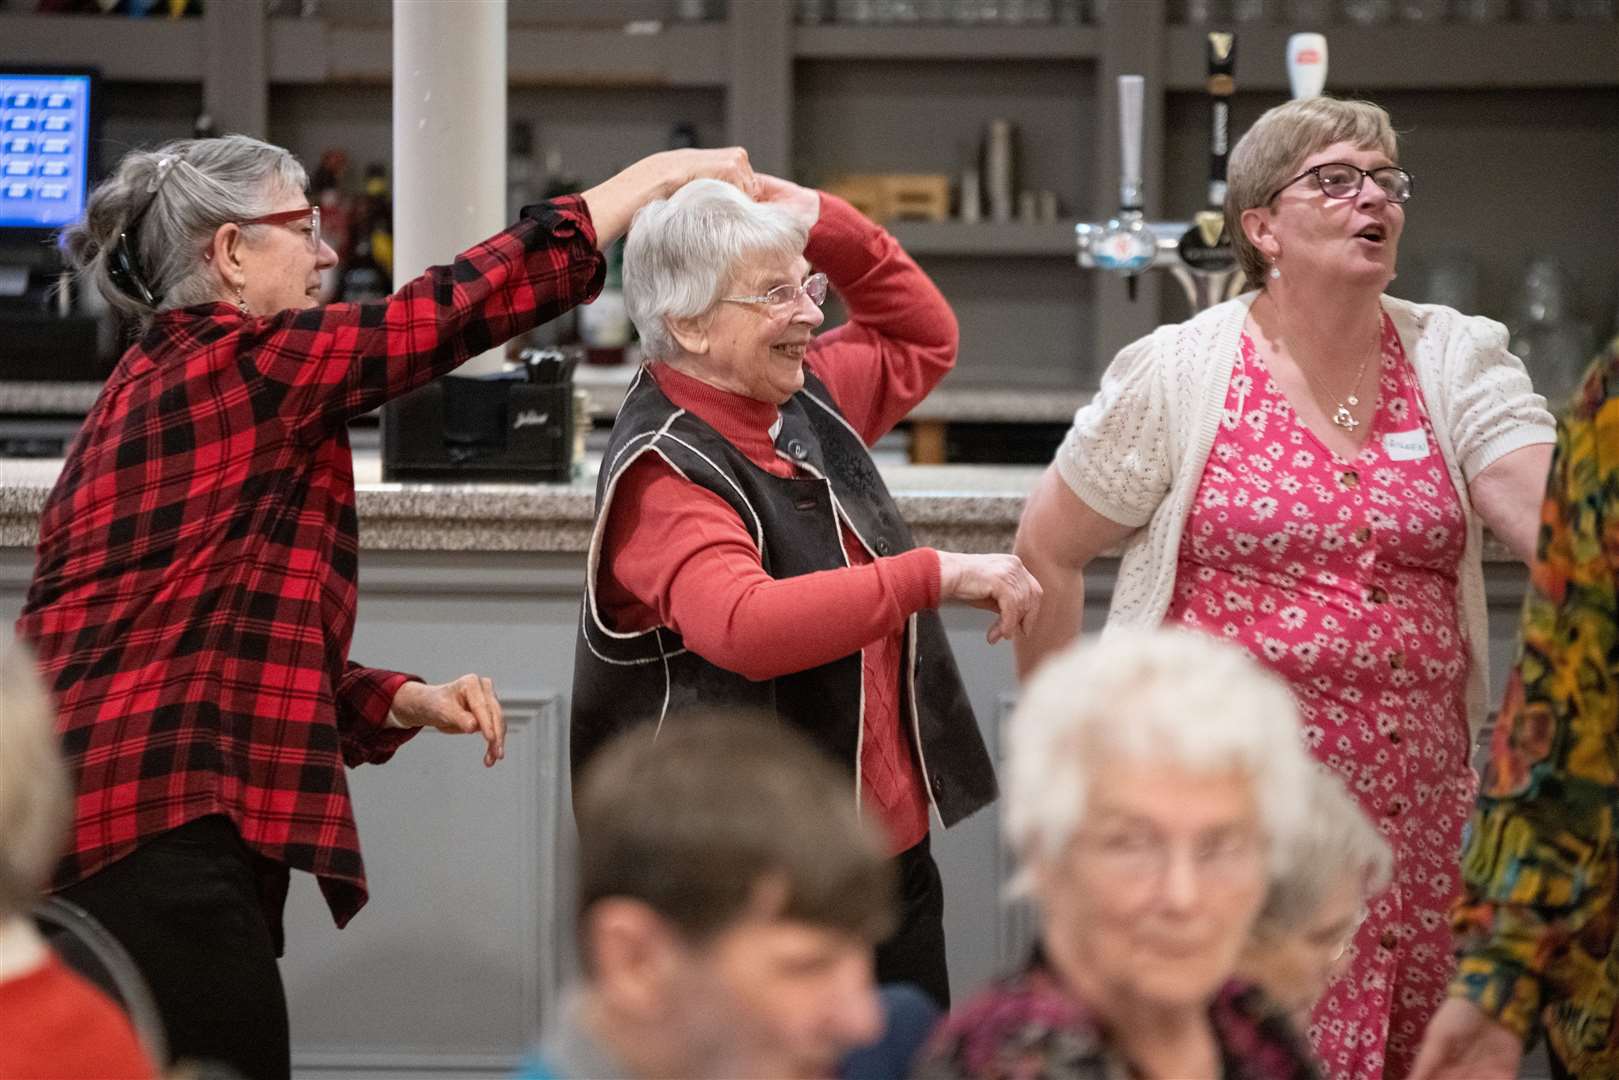 The first Forres Caring Community Circle event featured lots of laughter and dancing. Picture: Daniel Forsyth.